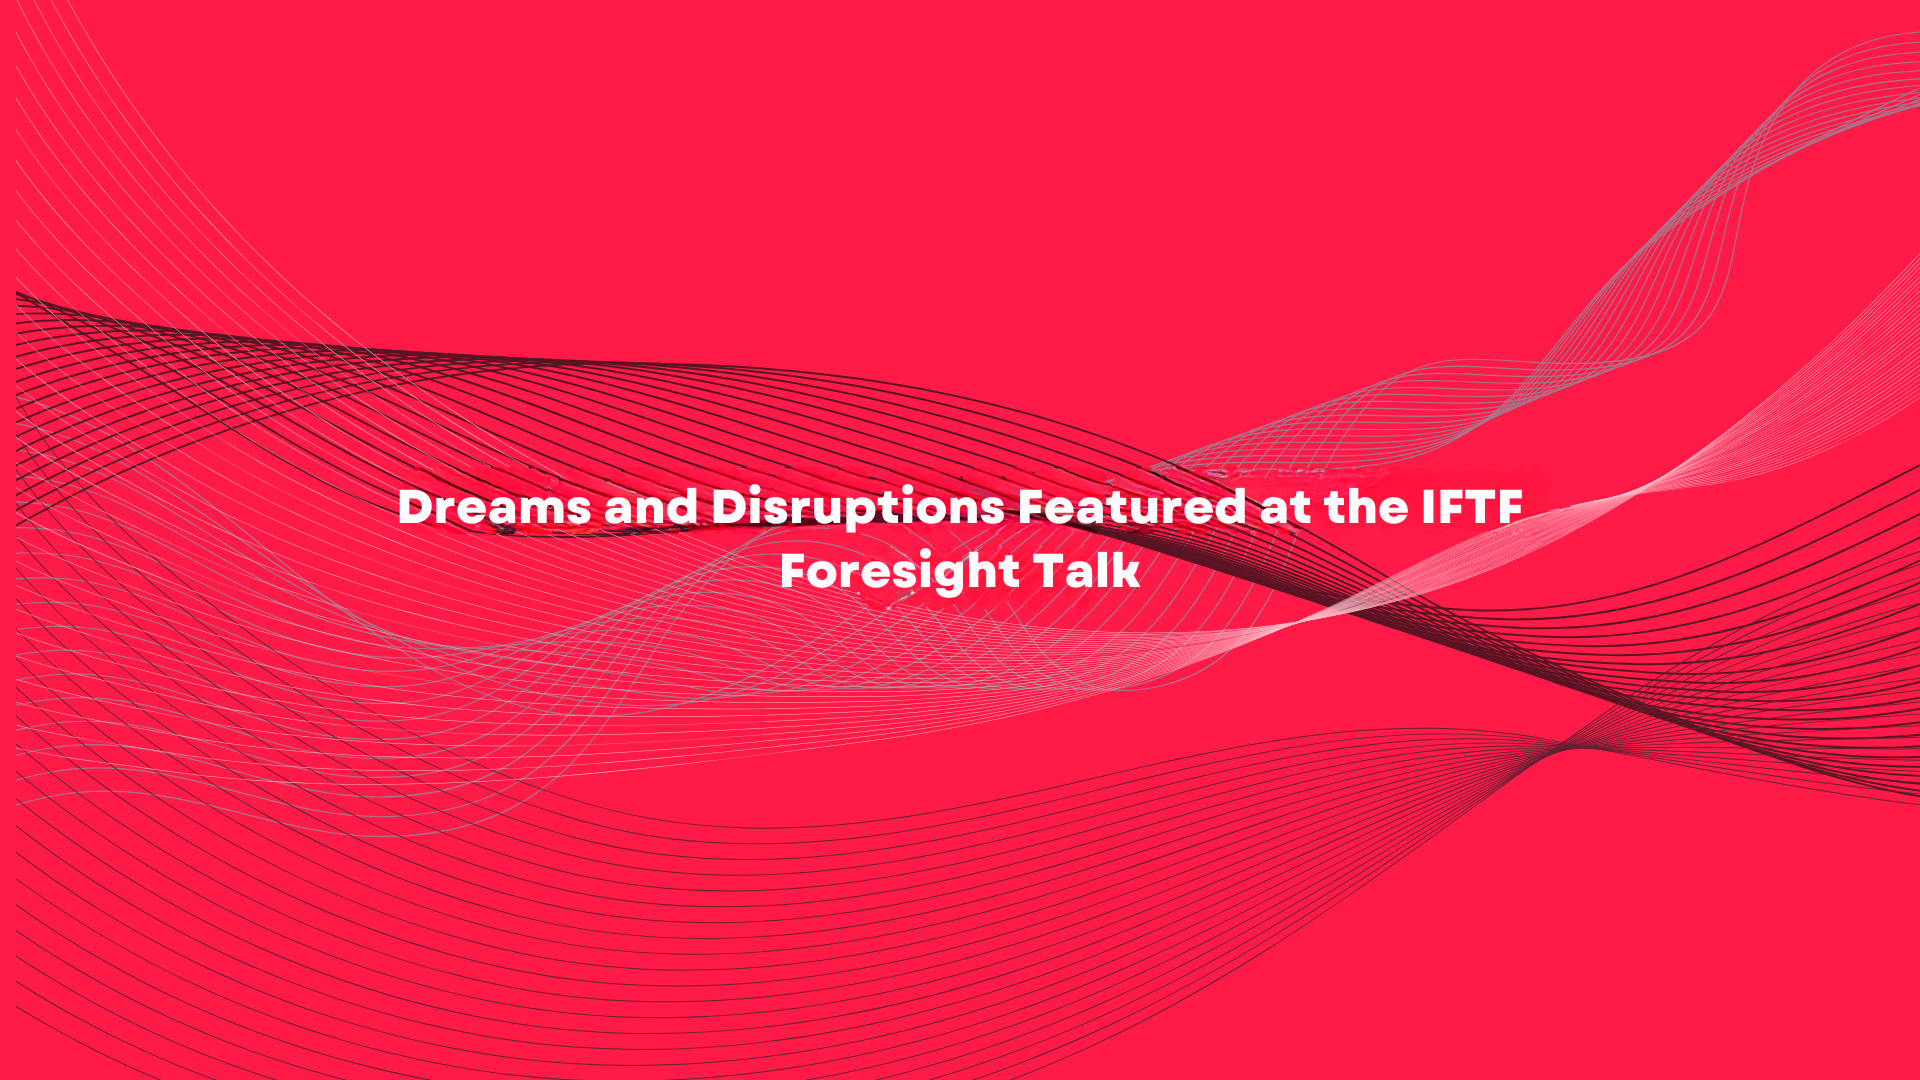 Dreams and Disruptions Featured at the IFTF Foresight Talk